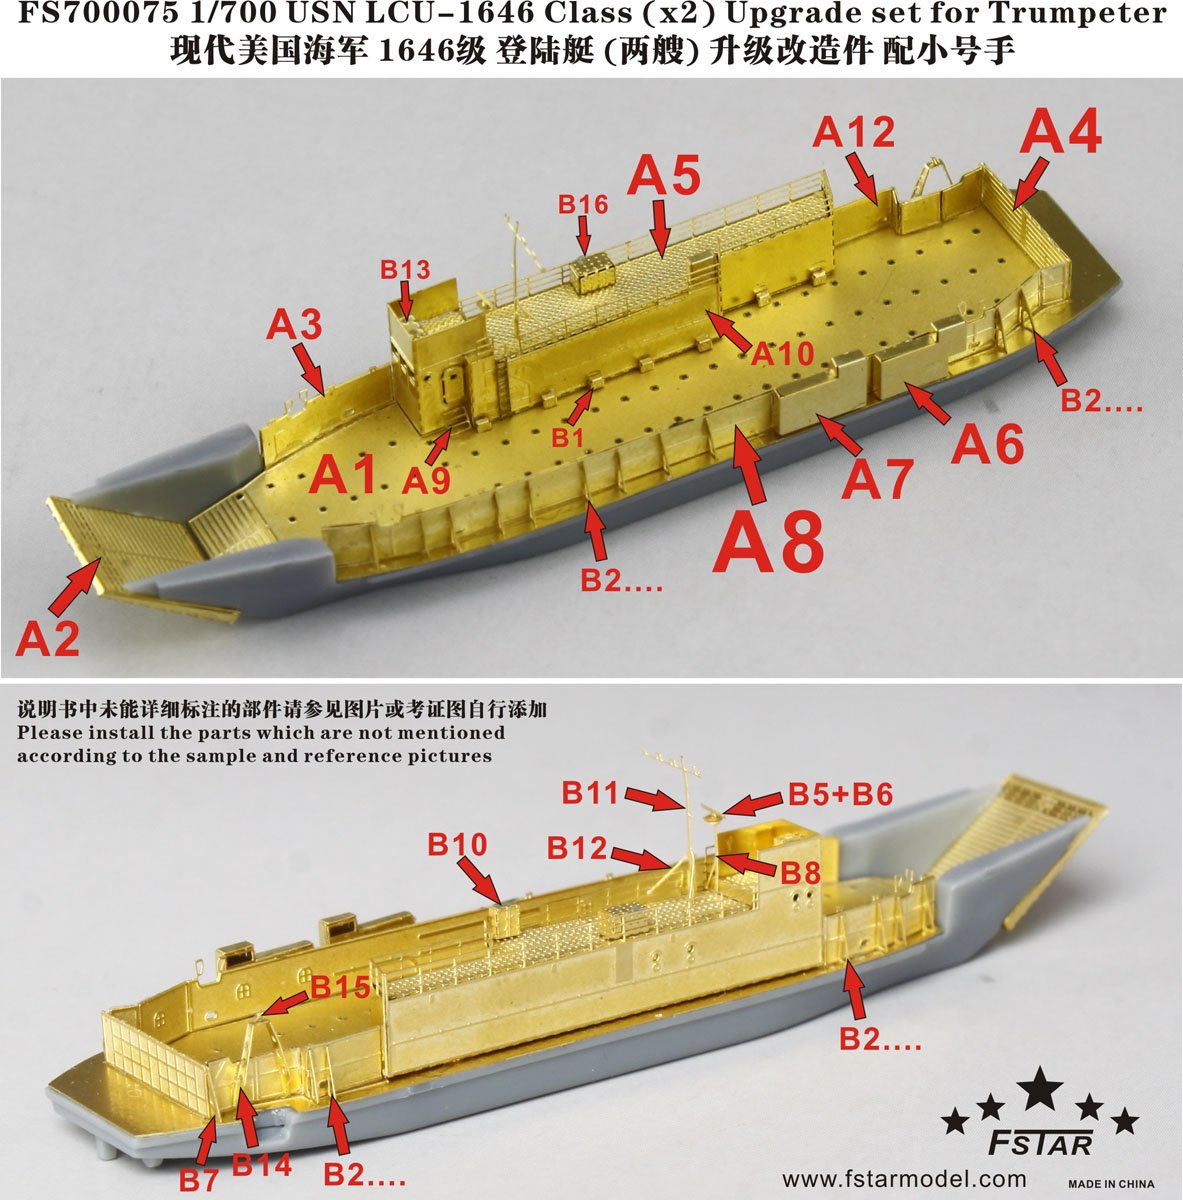 1/700 USN LCU-1646 Class (x2) Upgrade Set for Trumpeter - Click Image to Close